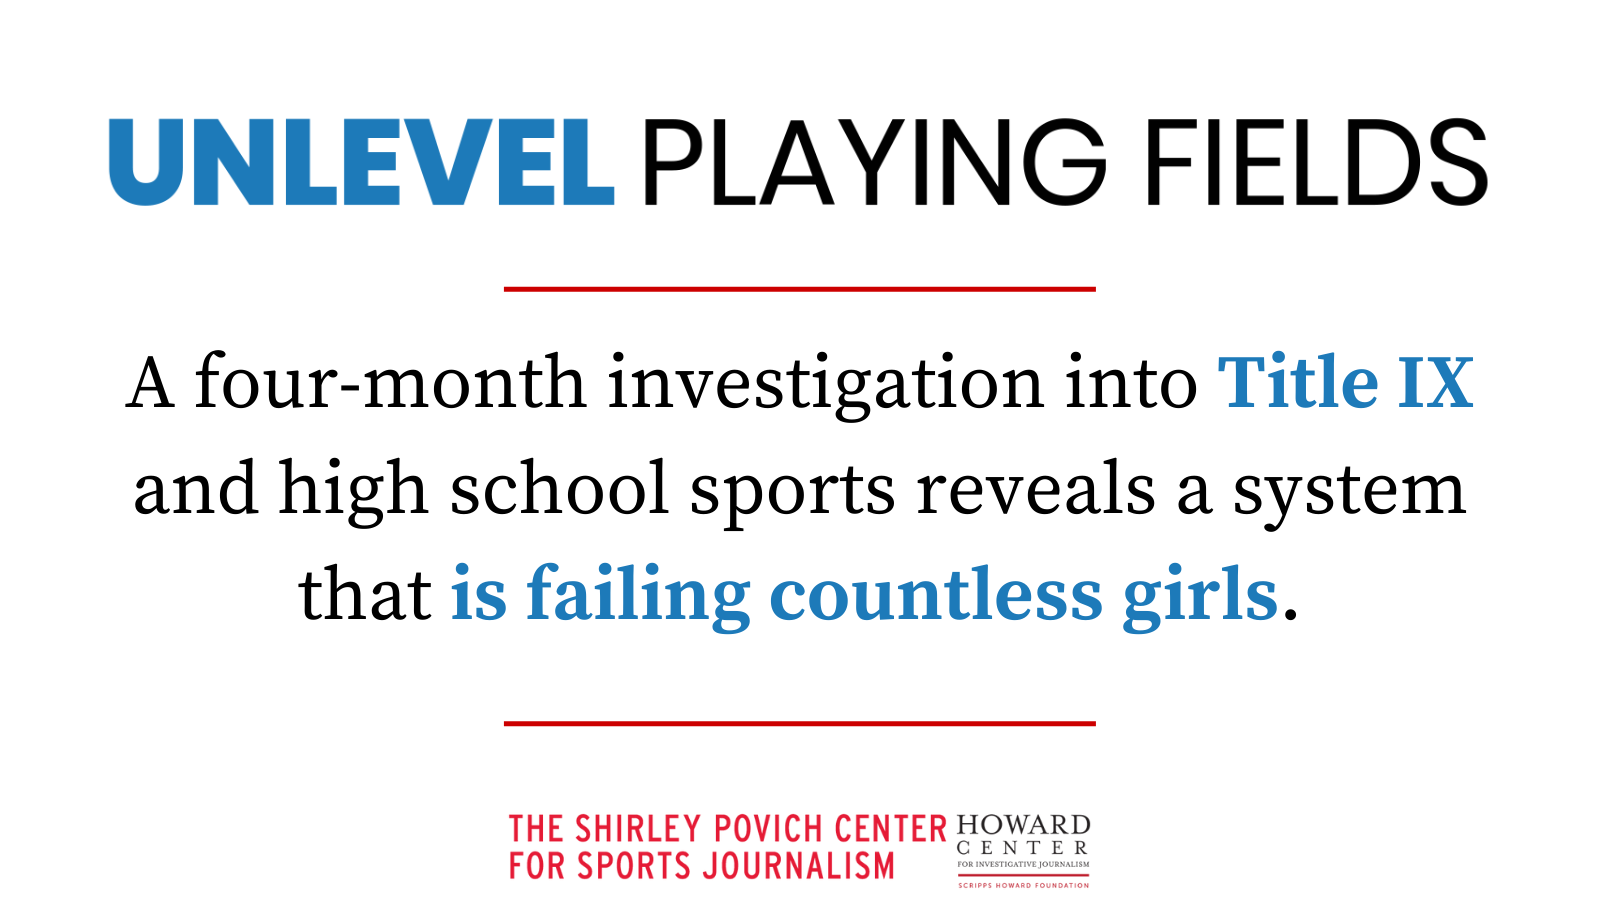 This Povich Center and Howard Center investigation raises serious questions about Title IX compliance in high schools across the country.